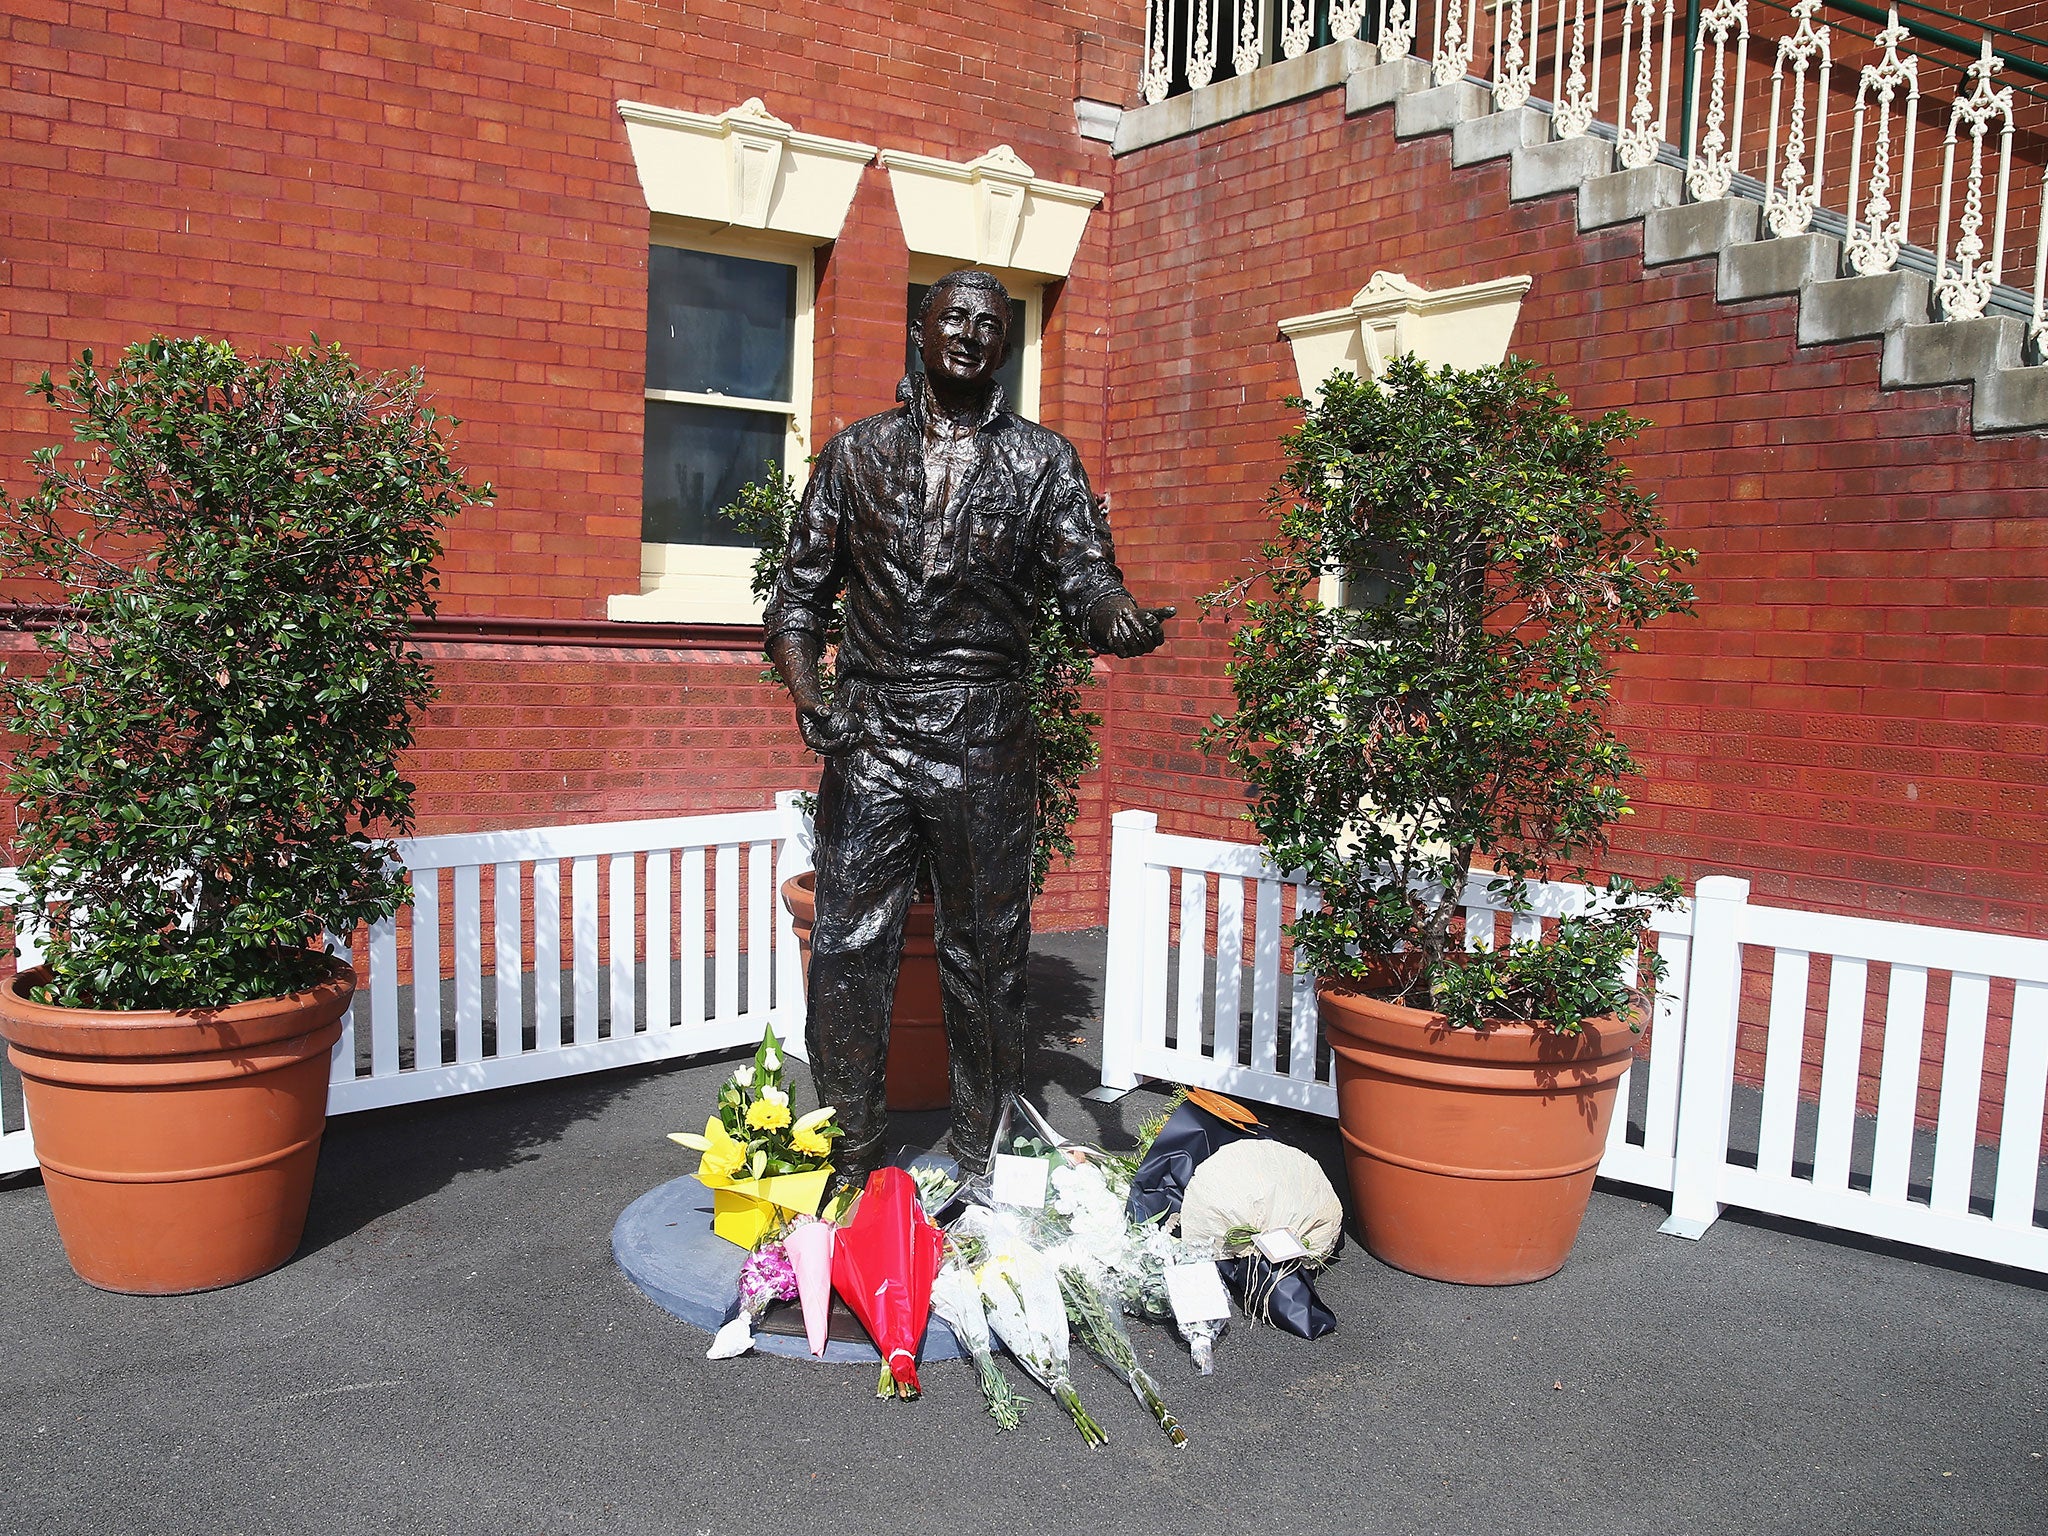 The statue of Richie Benaud at the Sydney Cricket Ground